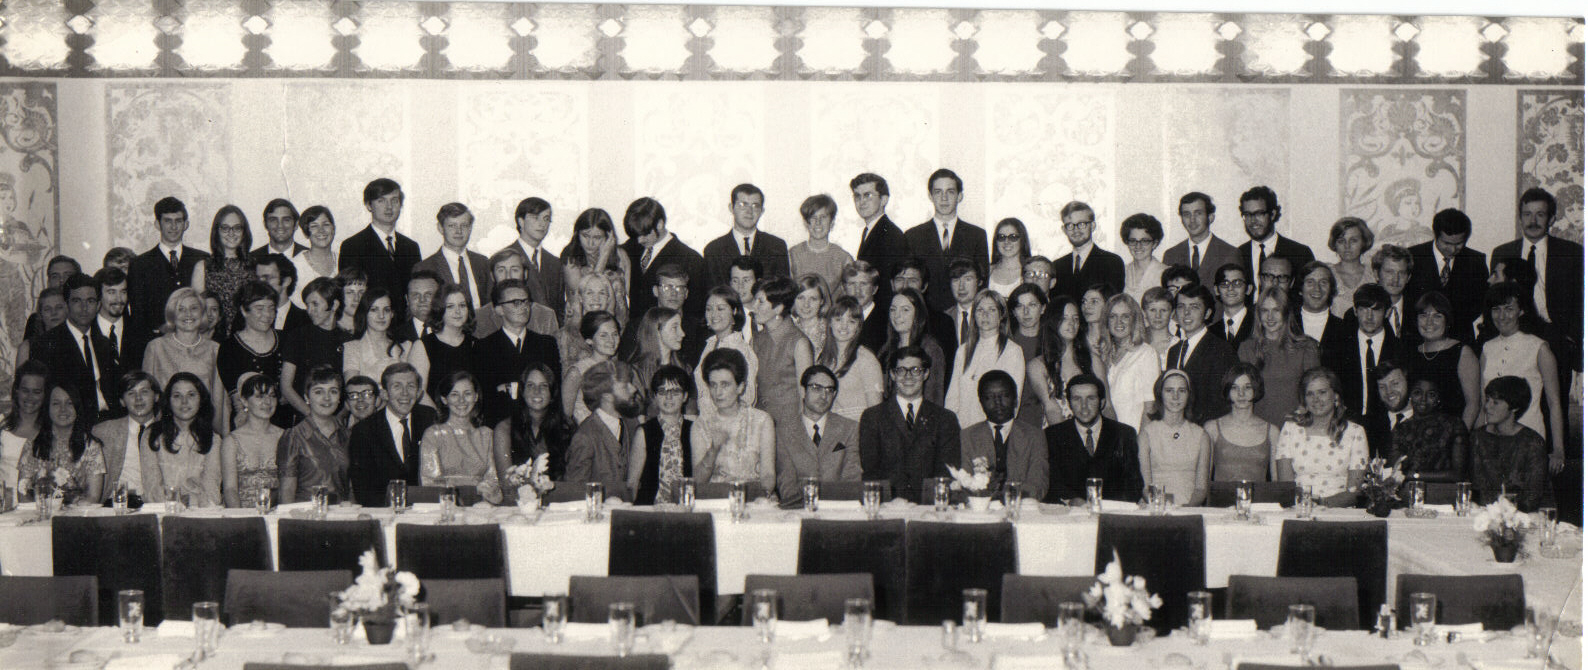 JYM Class photo, large group in a formal dining area posing for a picture 